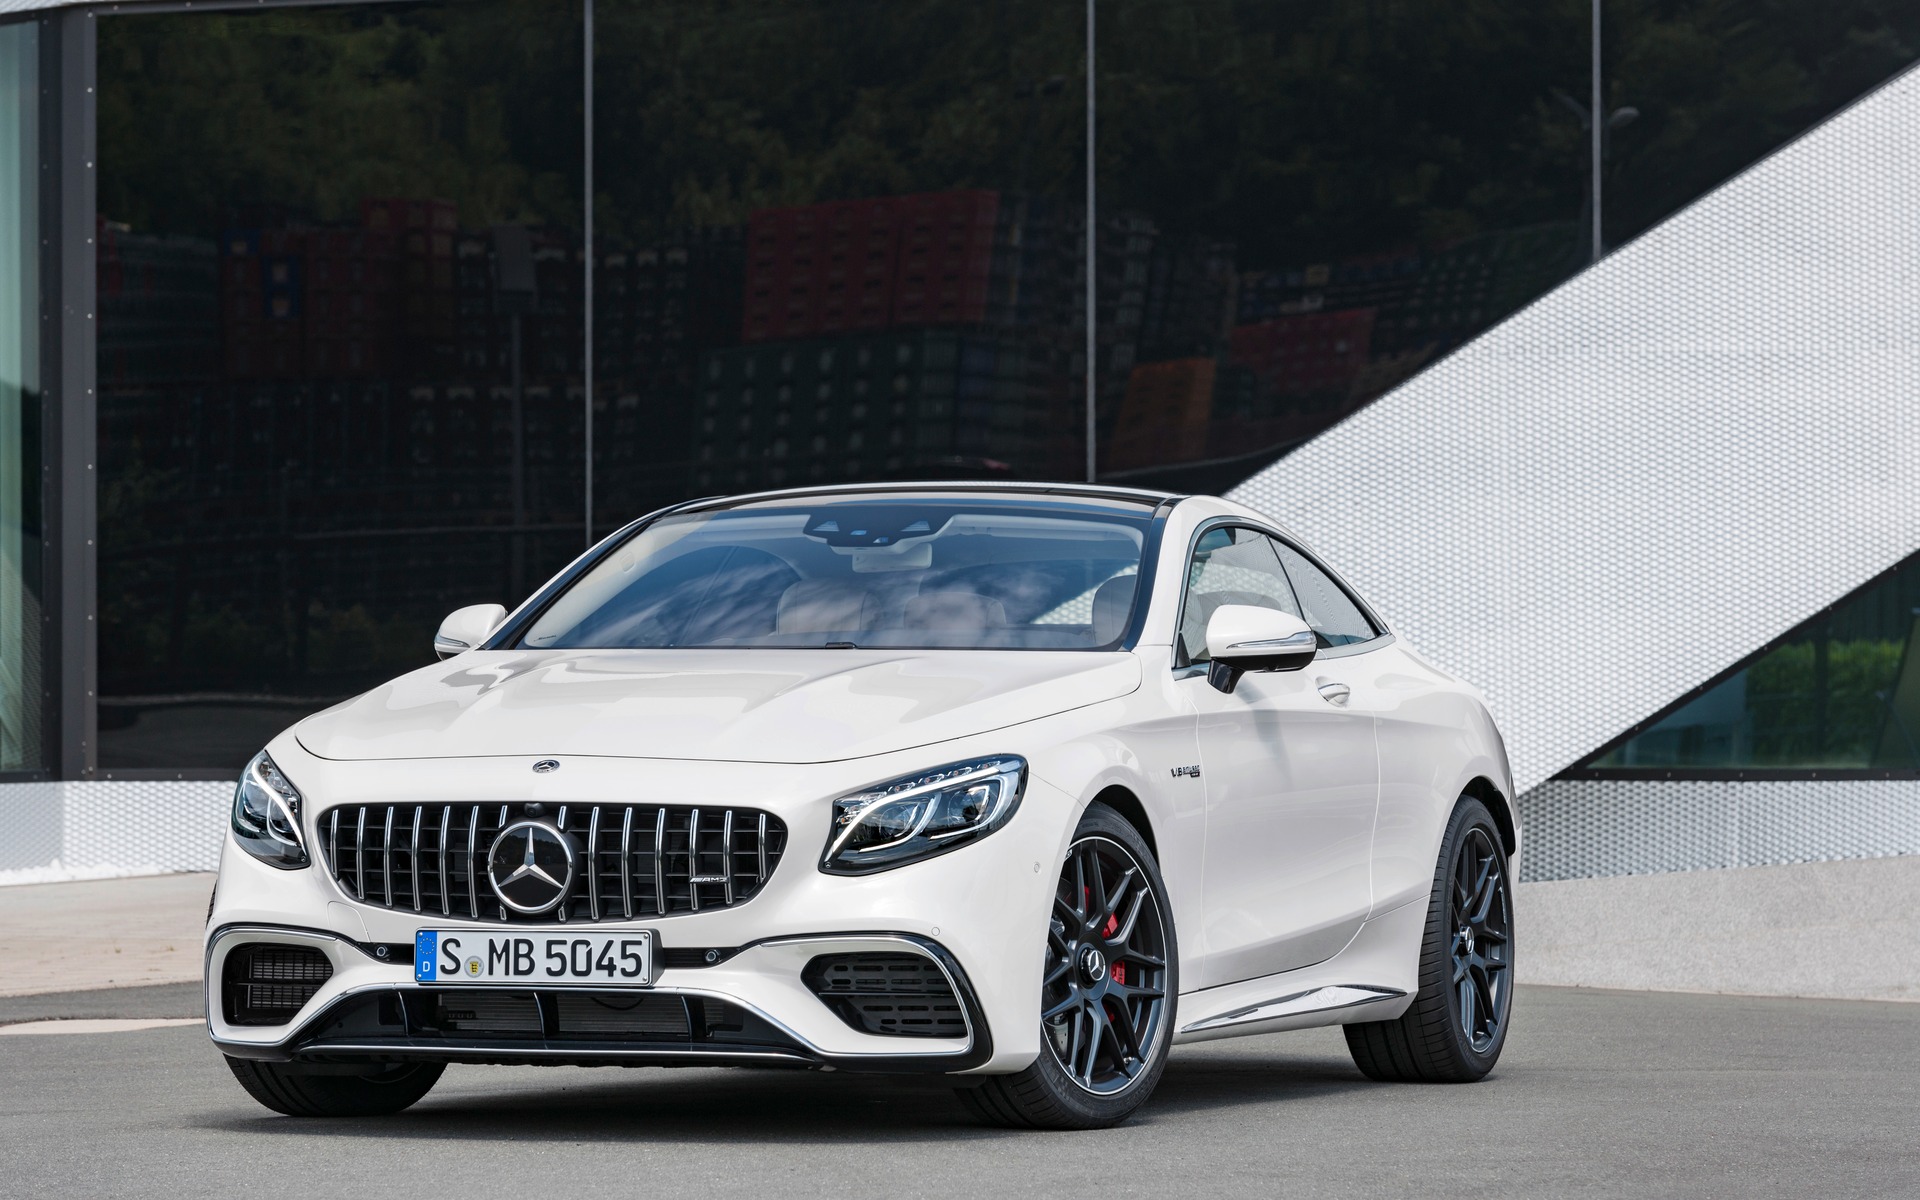 S класс amg. Mercedes s63 AMG Coupe. Mercedes Benz s class Coupe 63 AMG. Mercedes s63 AMG Coupe 2020. Mercedes s63 AMG Coupe 2018.